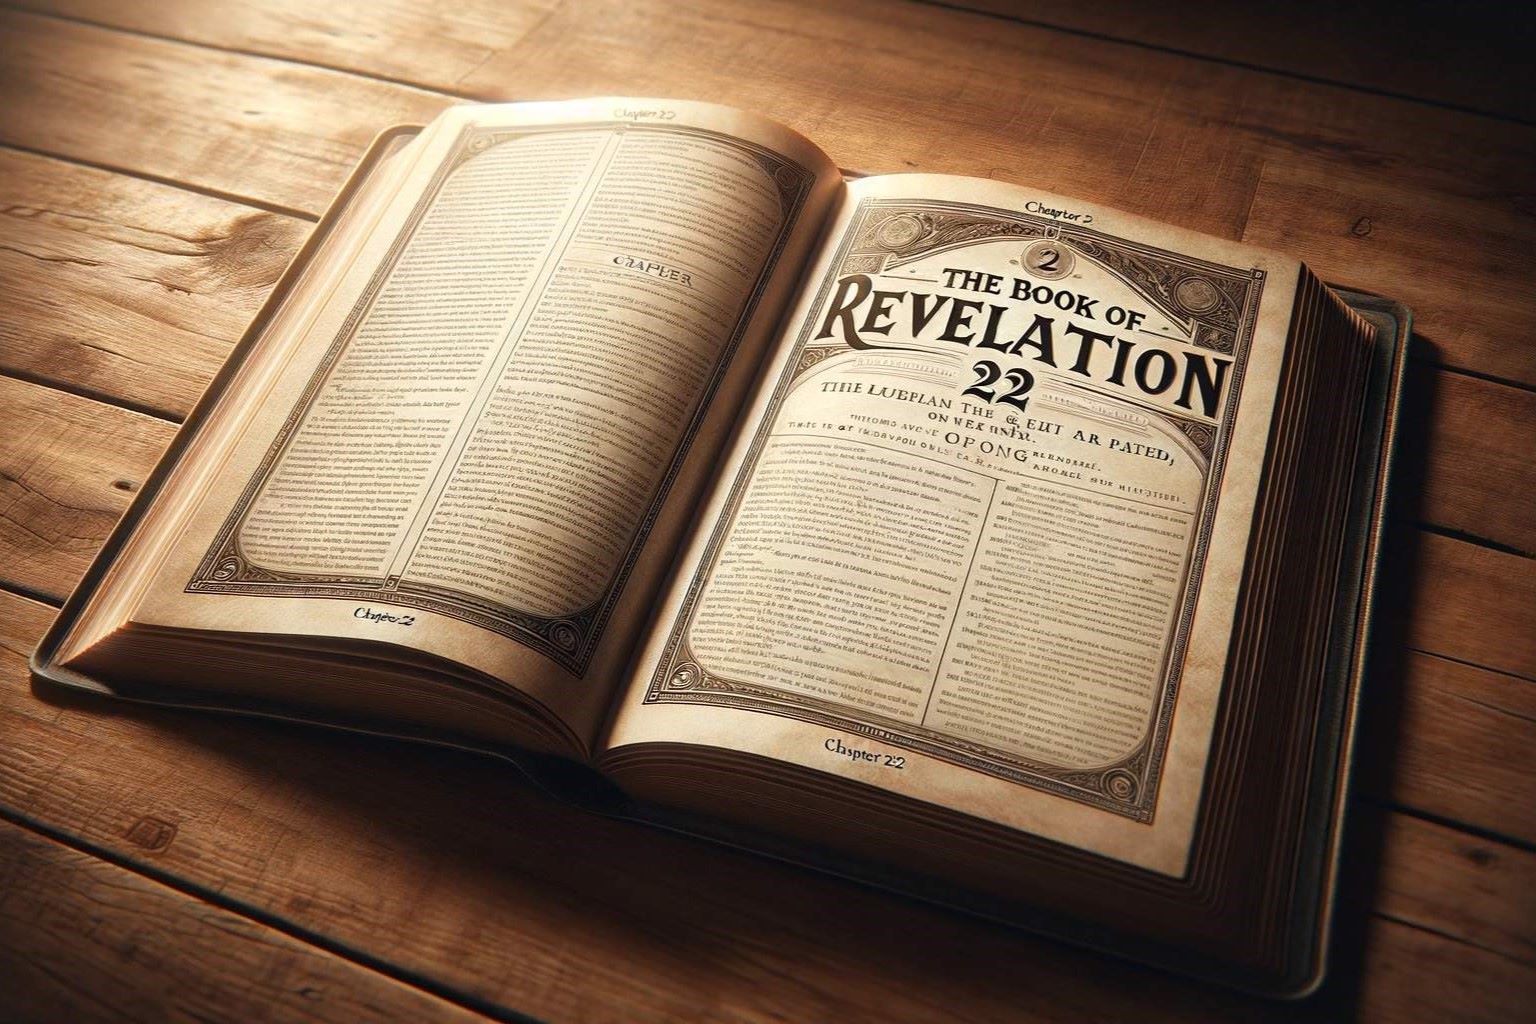 What Is The Last Book Of Revelation